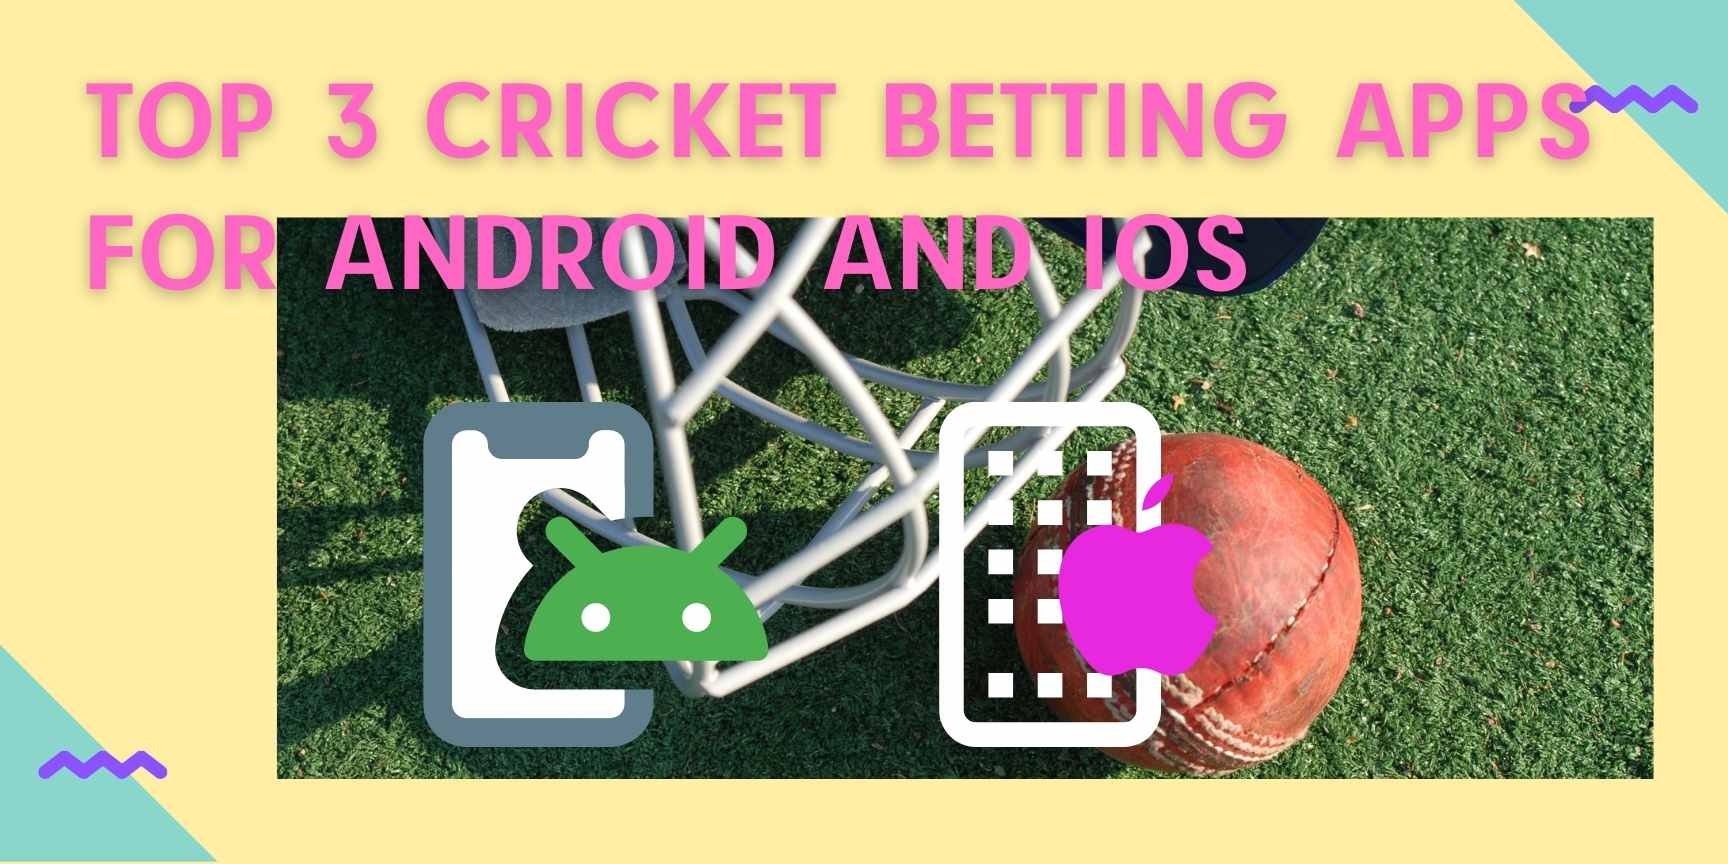 Top 3 cricket betting apps for Android and IOS